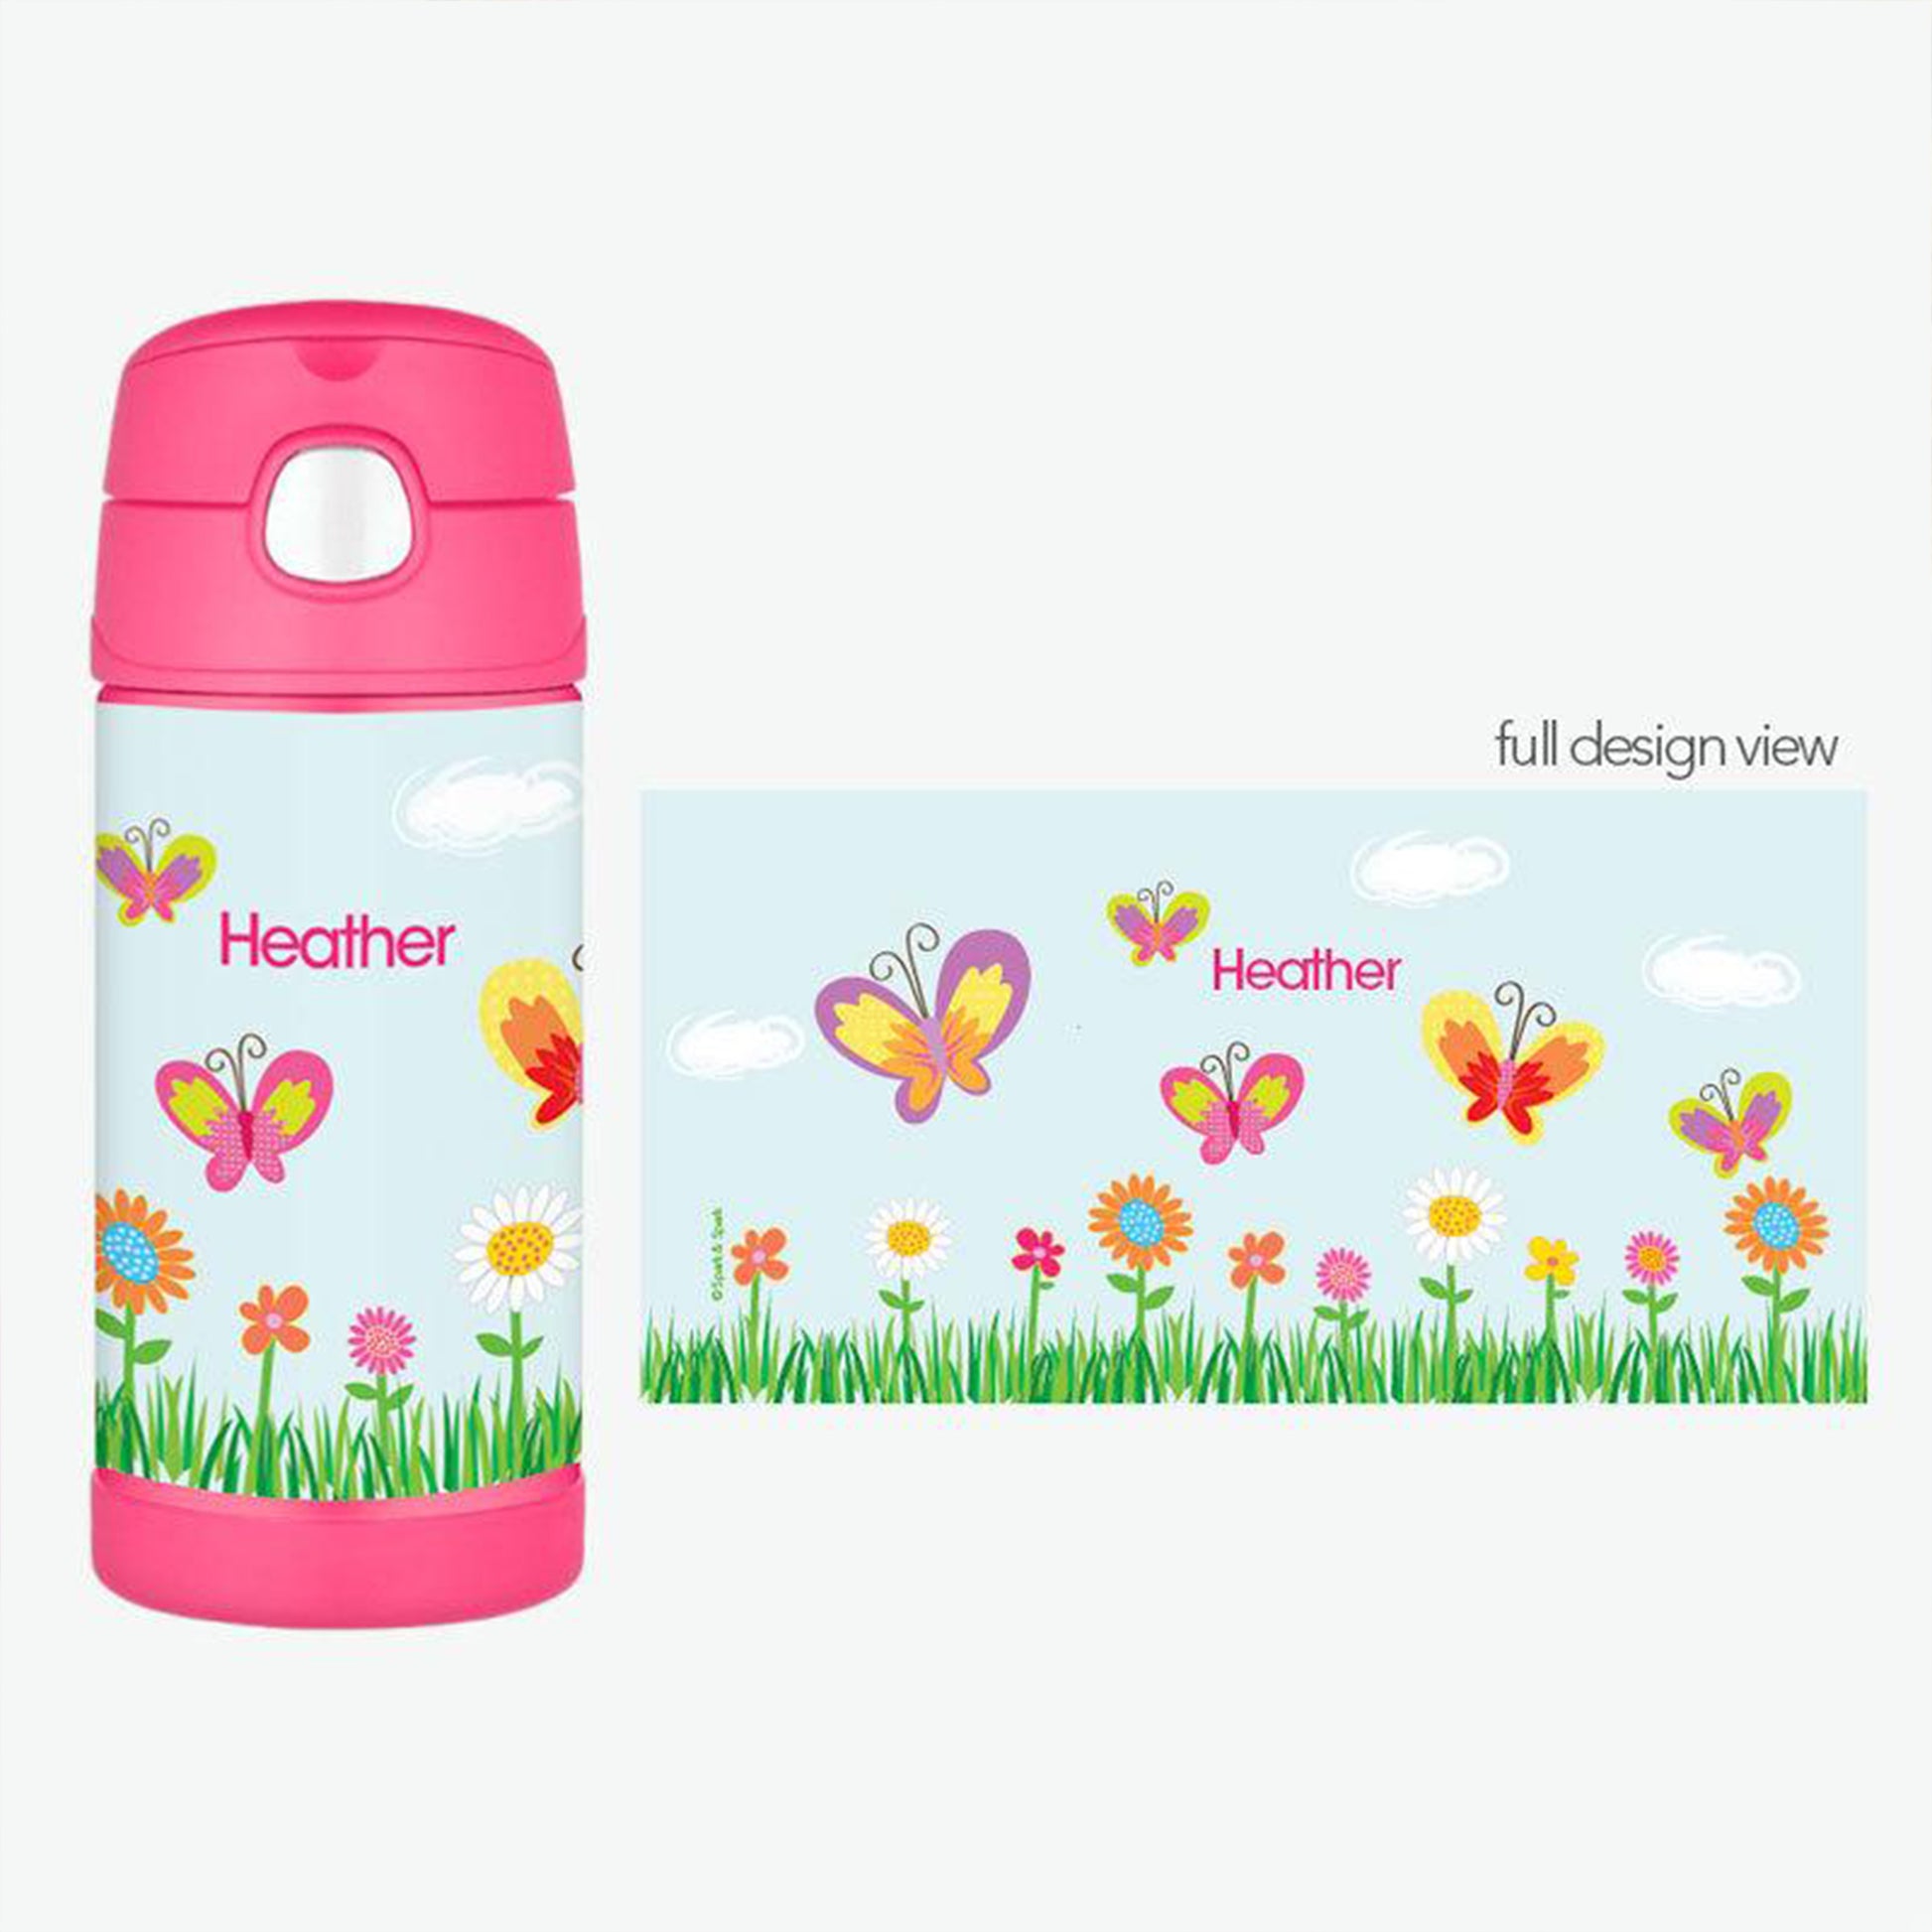 Personalised thermos bottle with logo